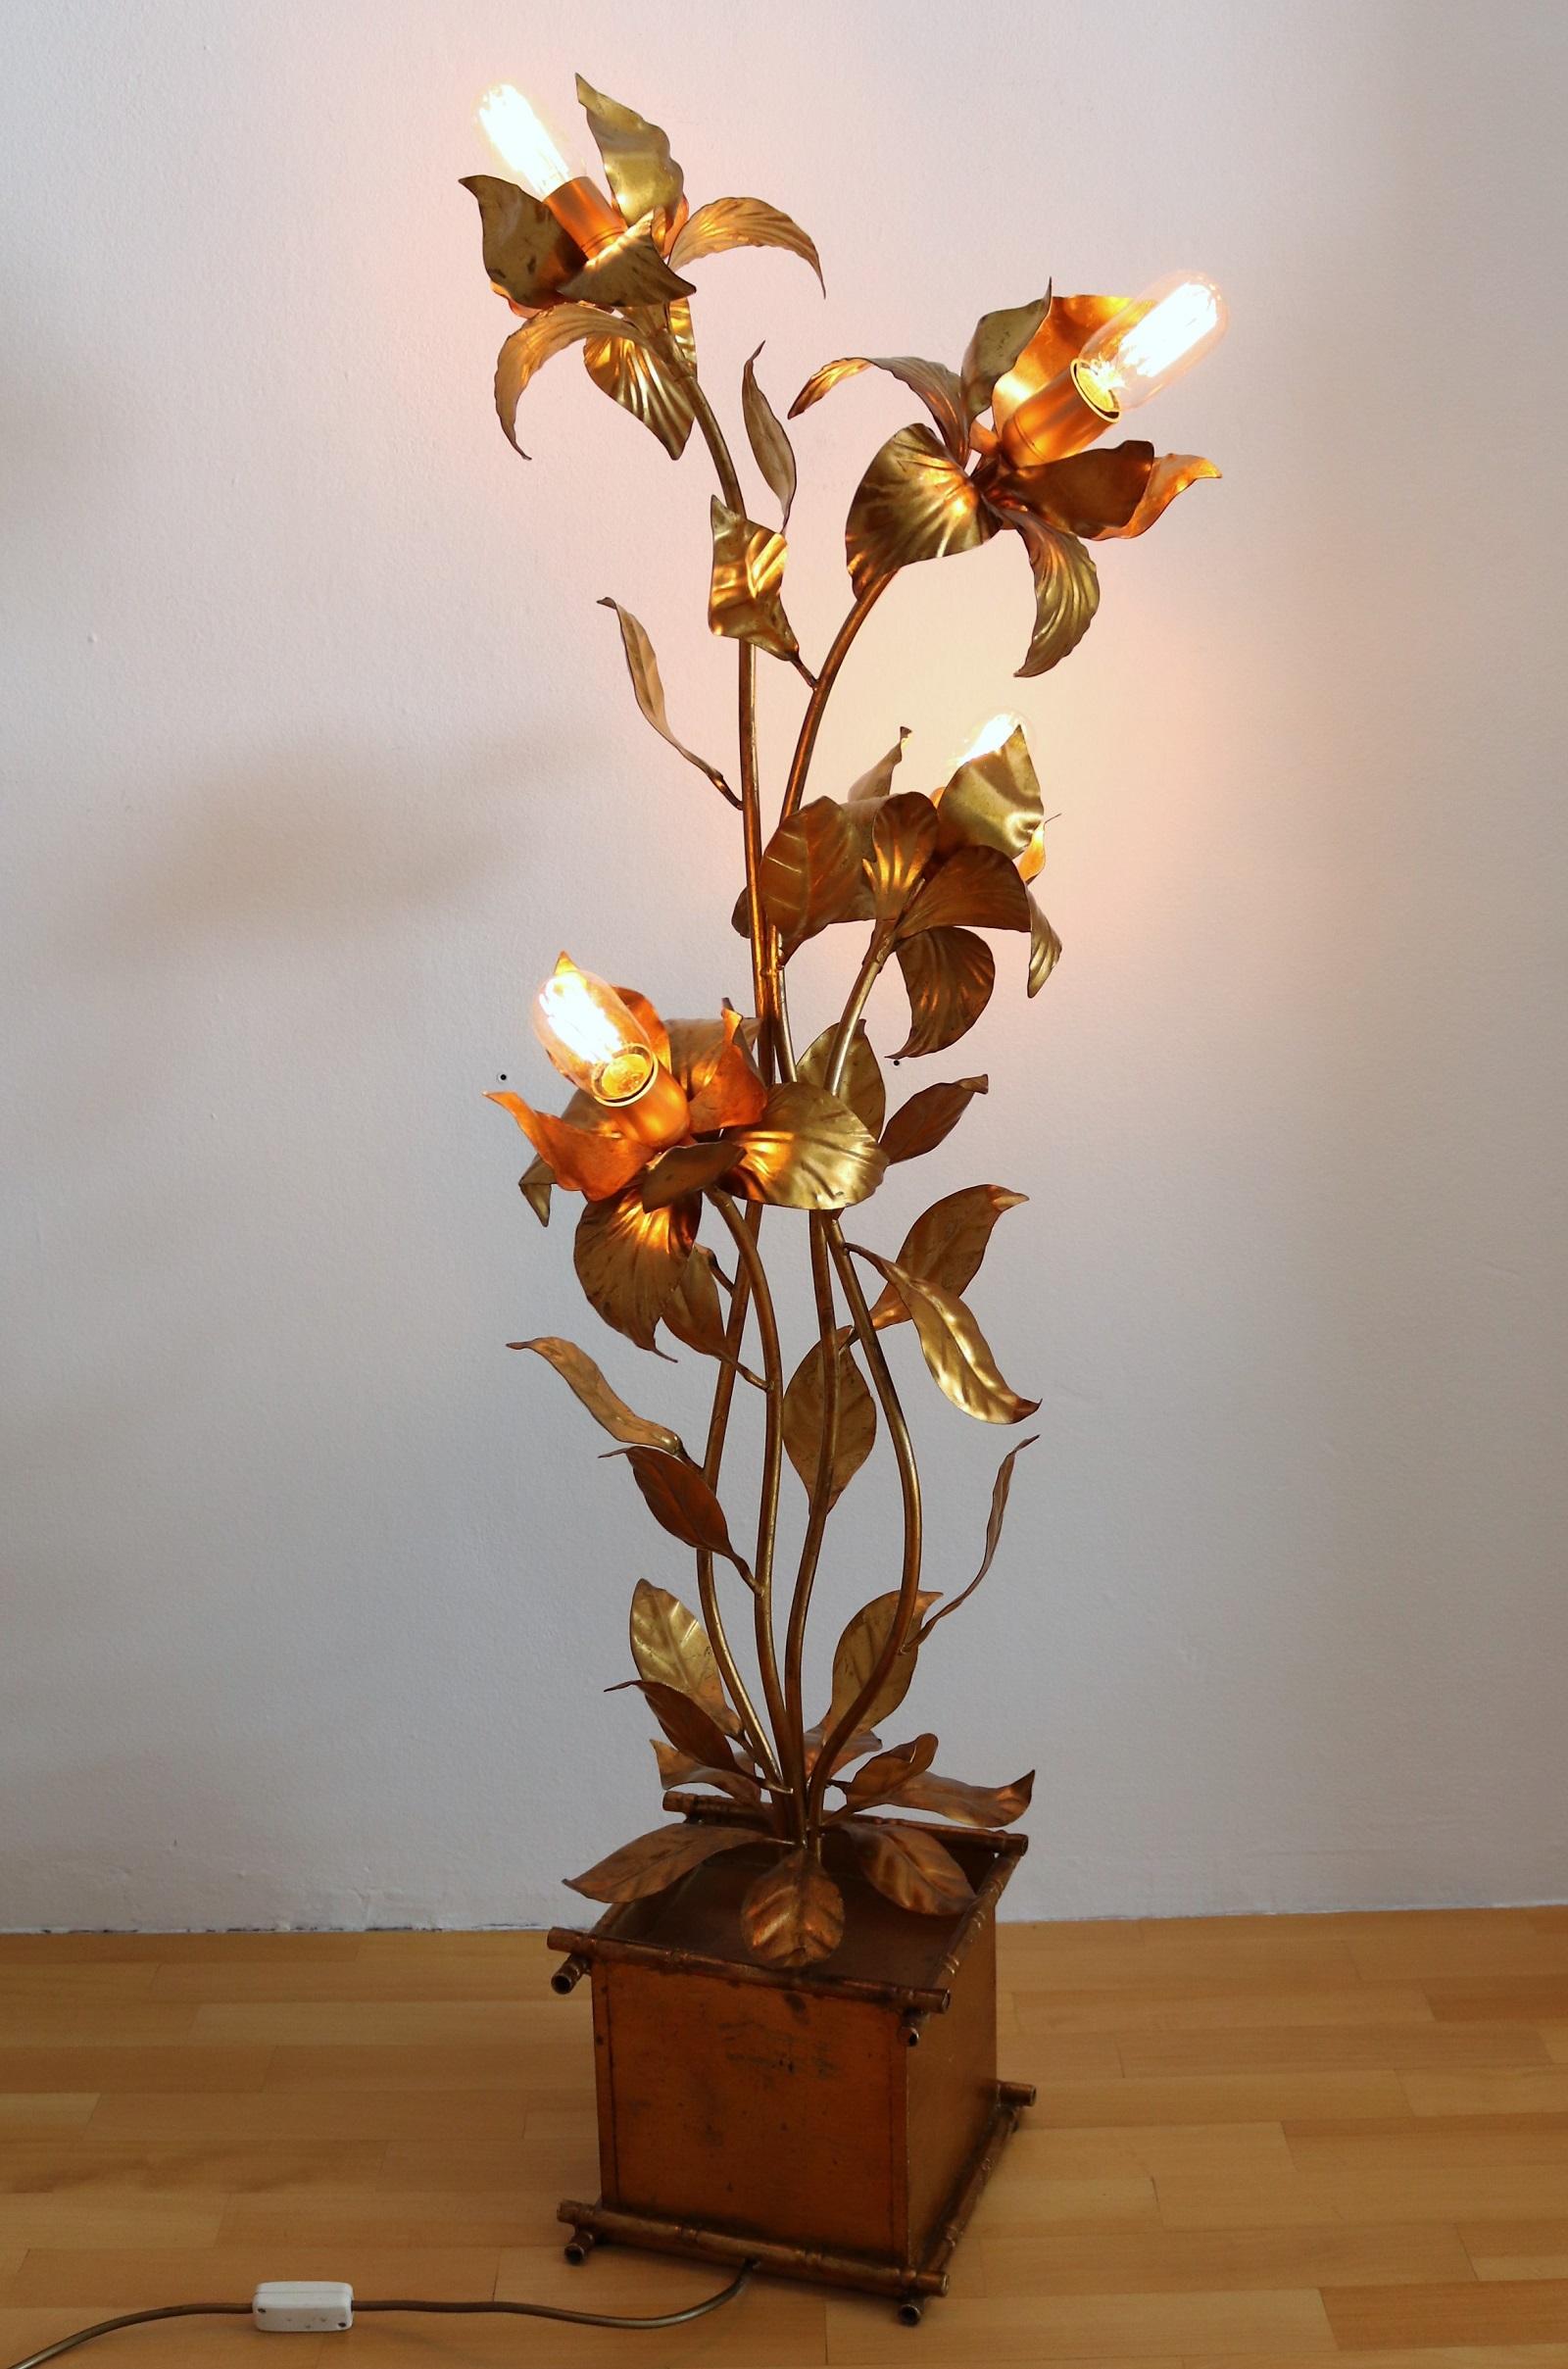 Amazing floor lamp made of gilt metal by Messrs. Kögl, Germany, in the 1970s.
Full Hollywood Regency style.
The lamp is made in the shape of a completely gilt flower pot with plant and 4 long stems with leaves and big lowers at the end.
In the